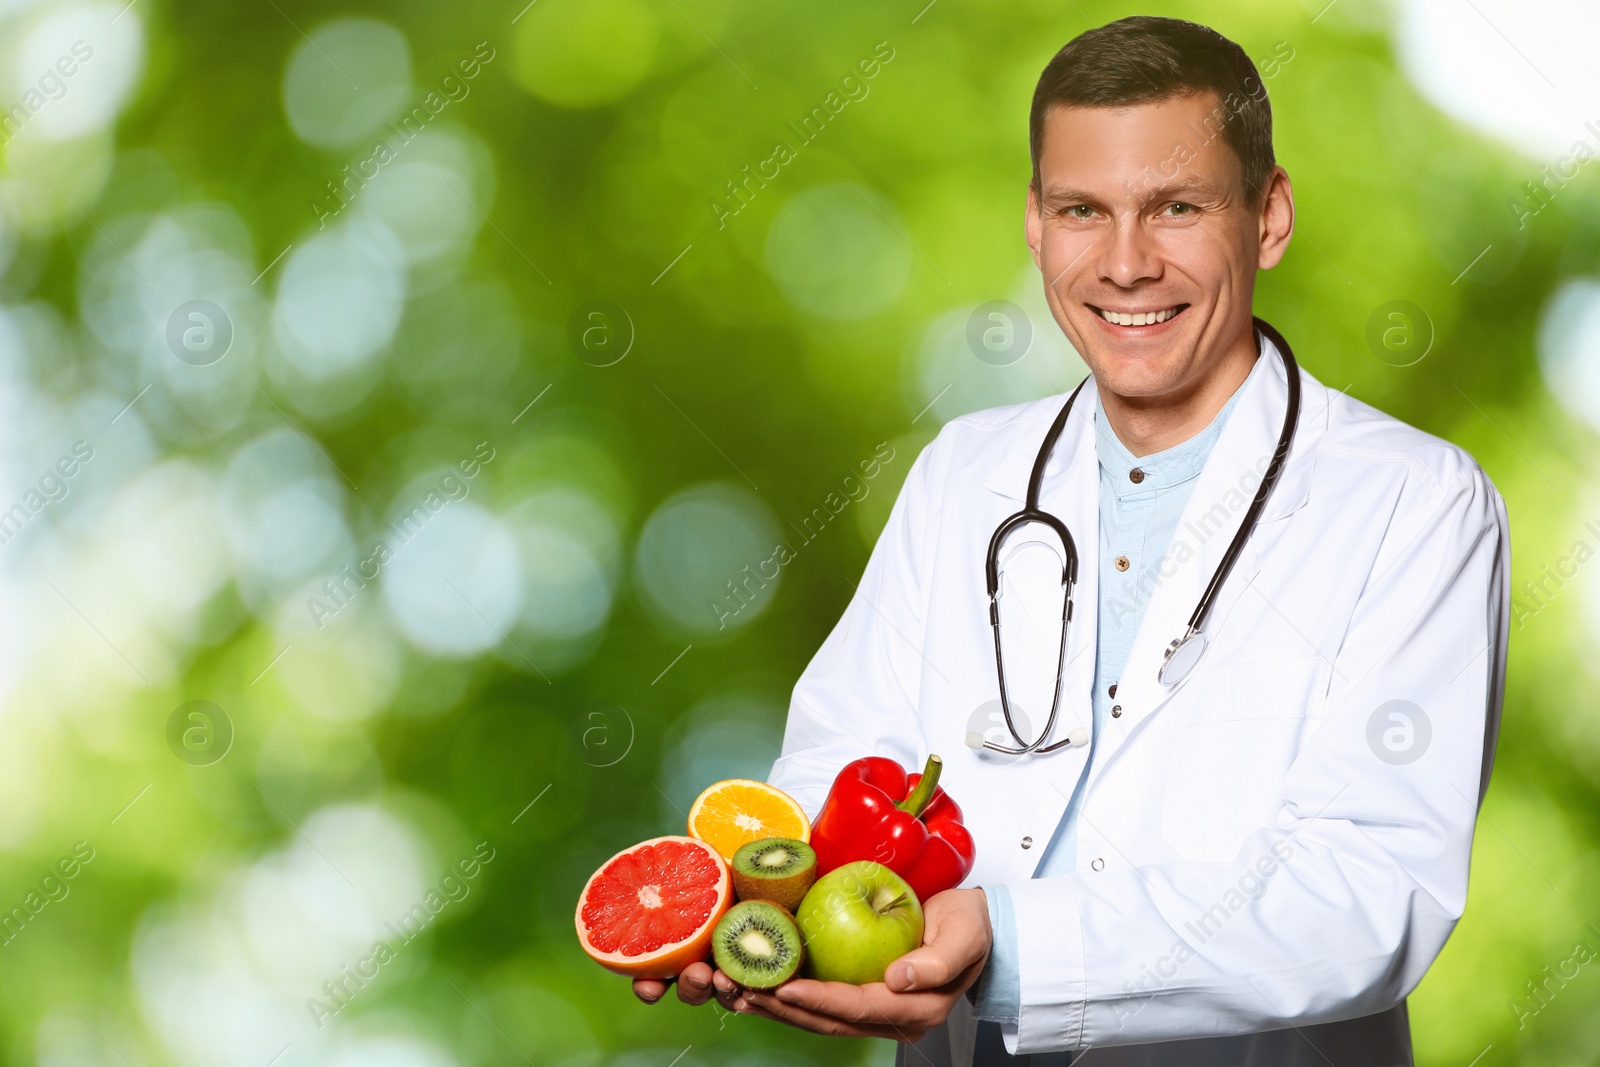 Image of Nutritionist with fresh products on blurred green background